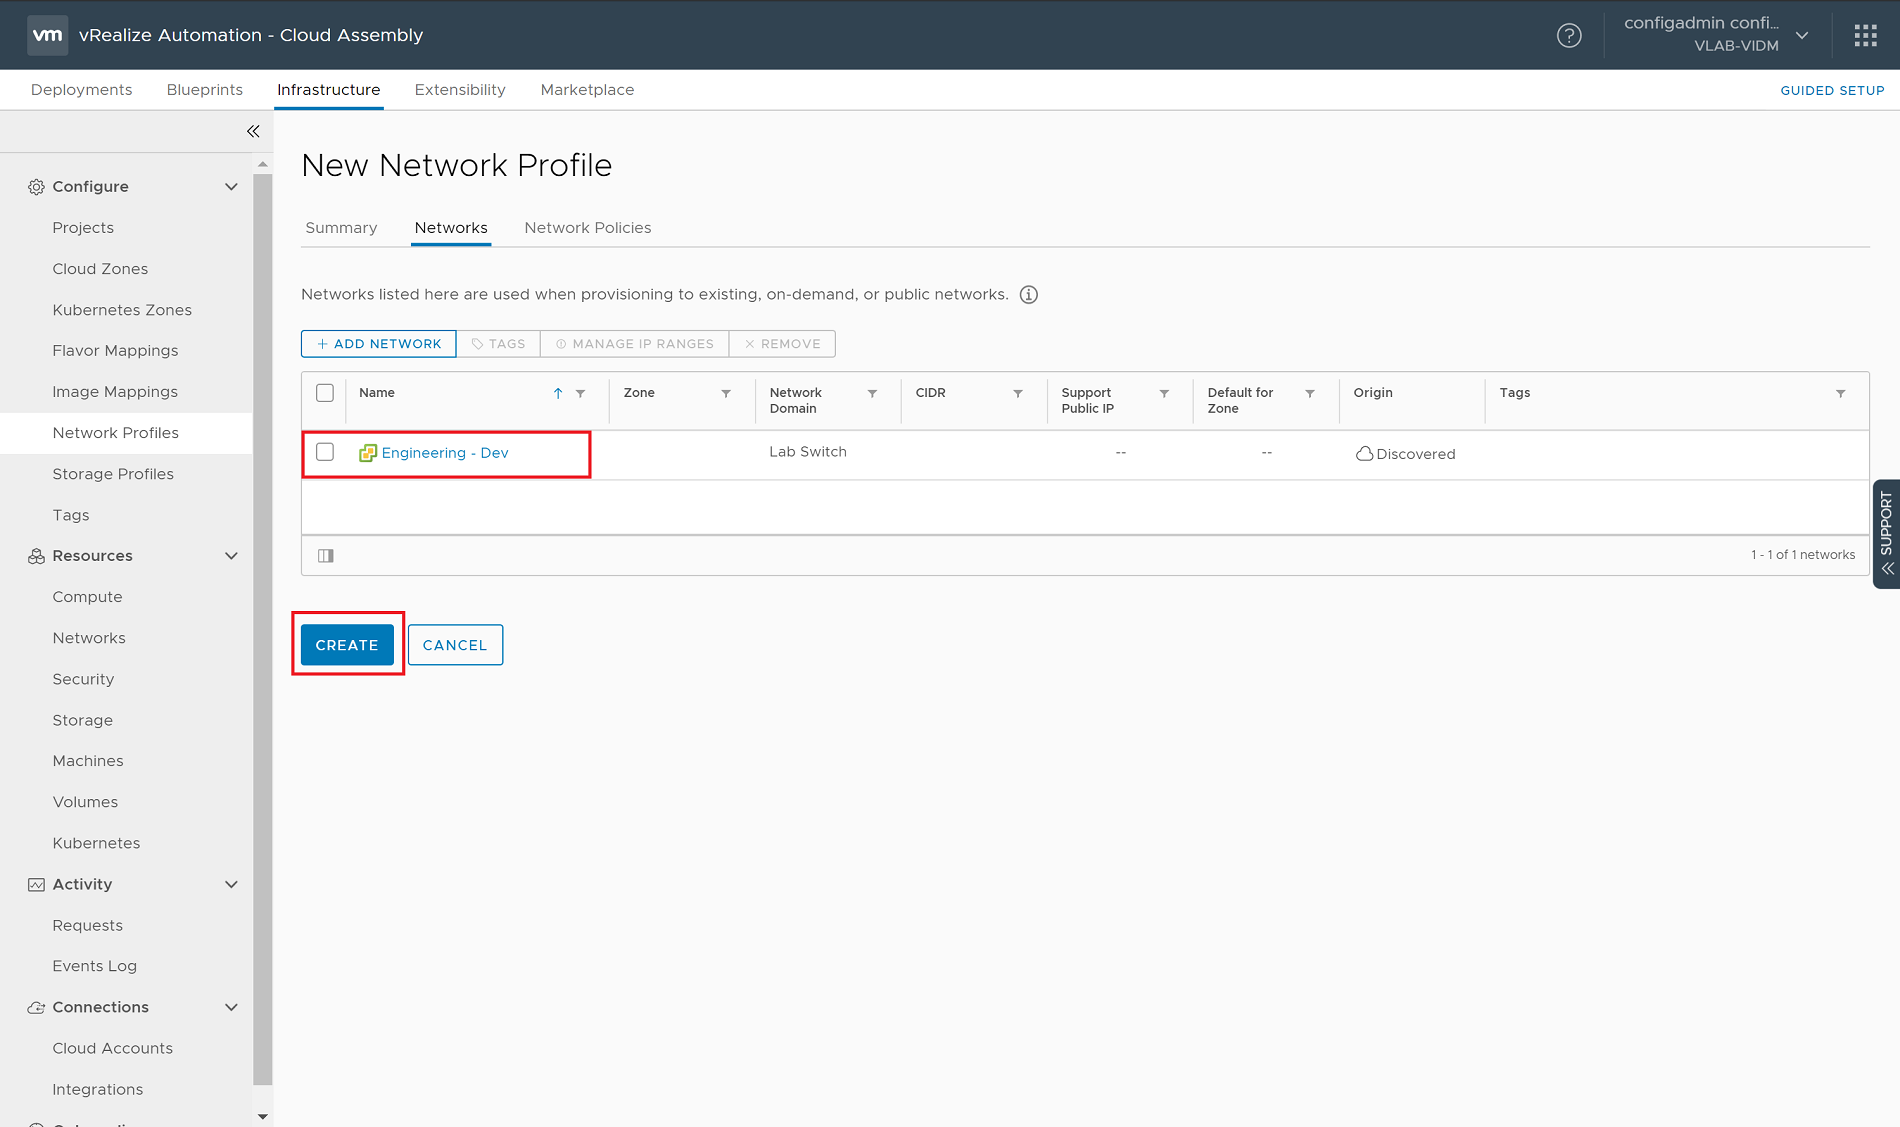 vRealize Automation 8.0 - Cloud Assembly - Infrastructure - Network Profiles - New Network Profile - Networks Tab - With Network Added to List